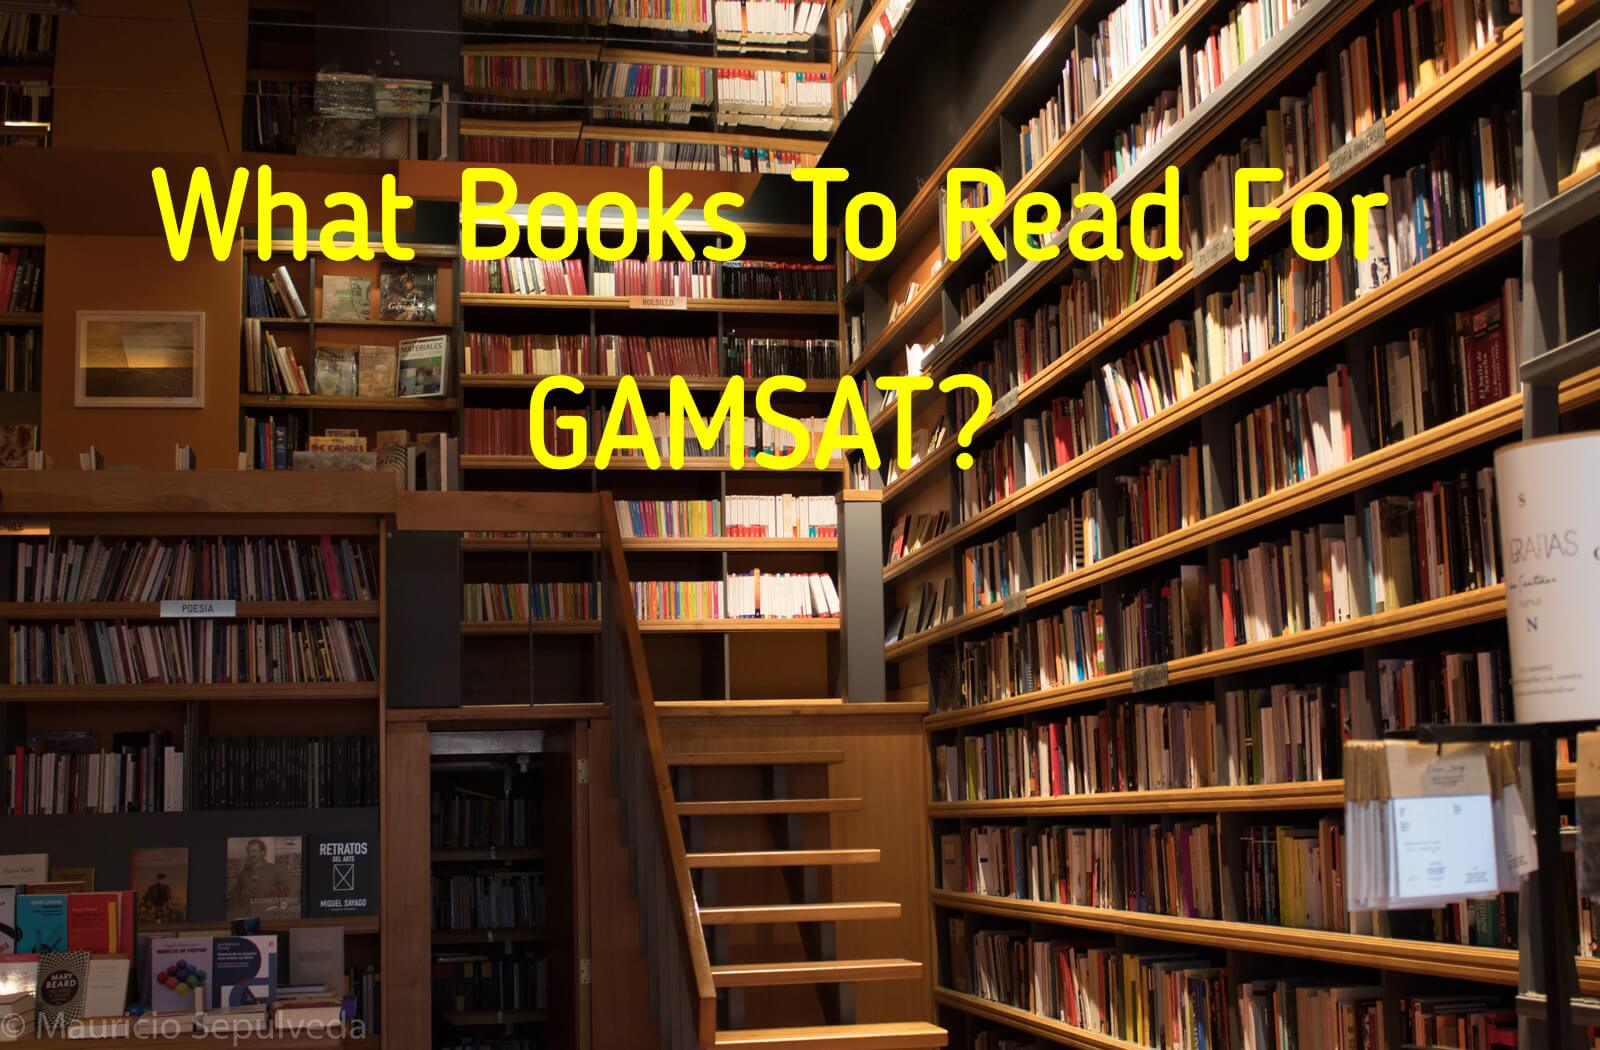 What Books To Read For Gamsat?